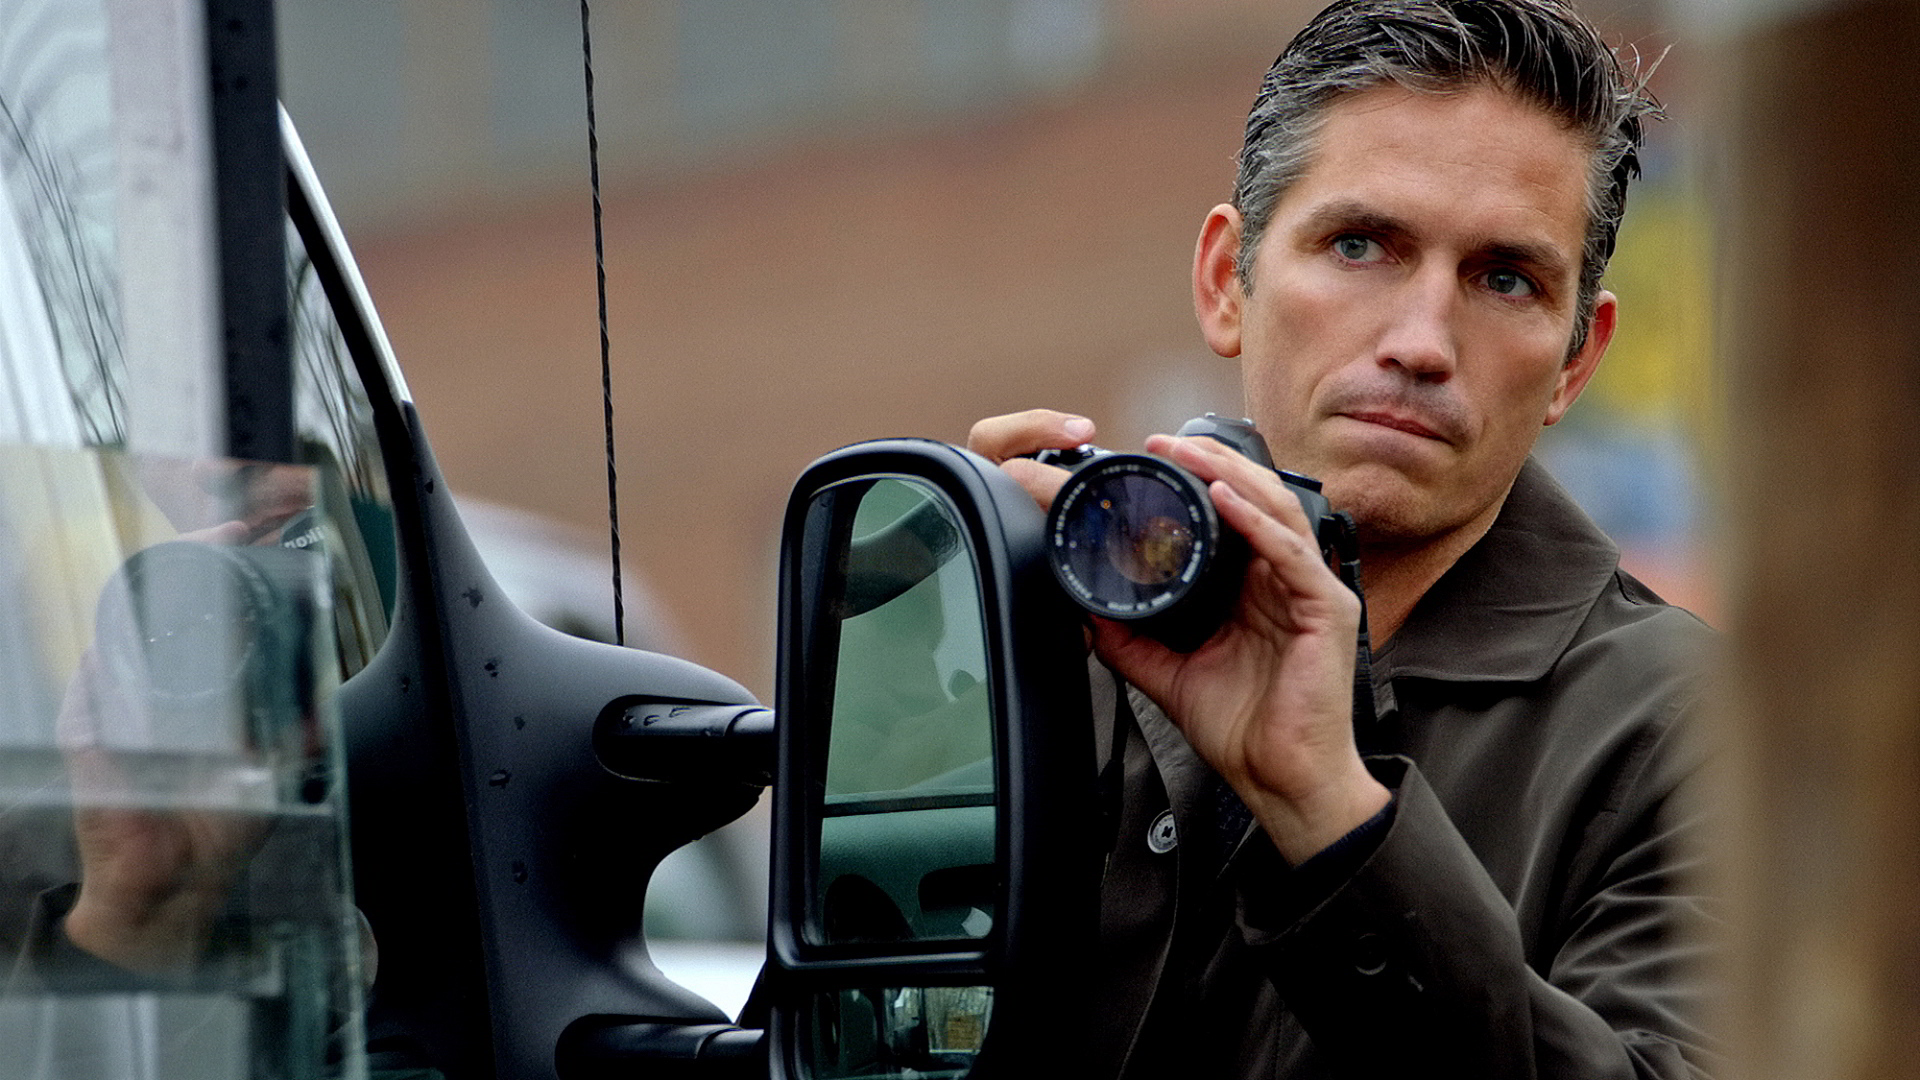 tv show, person of interest